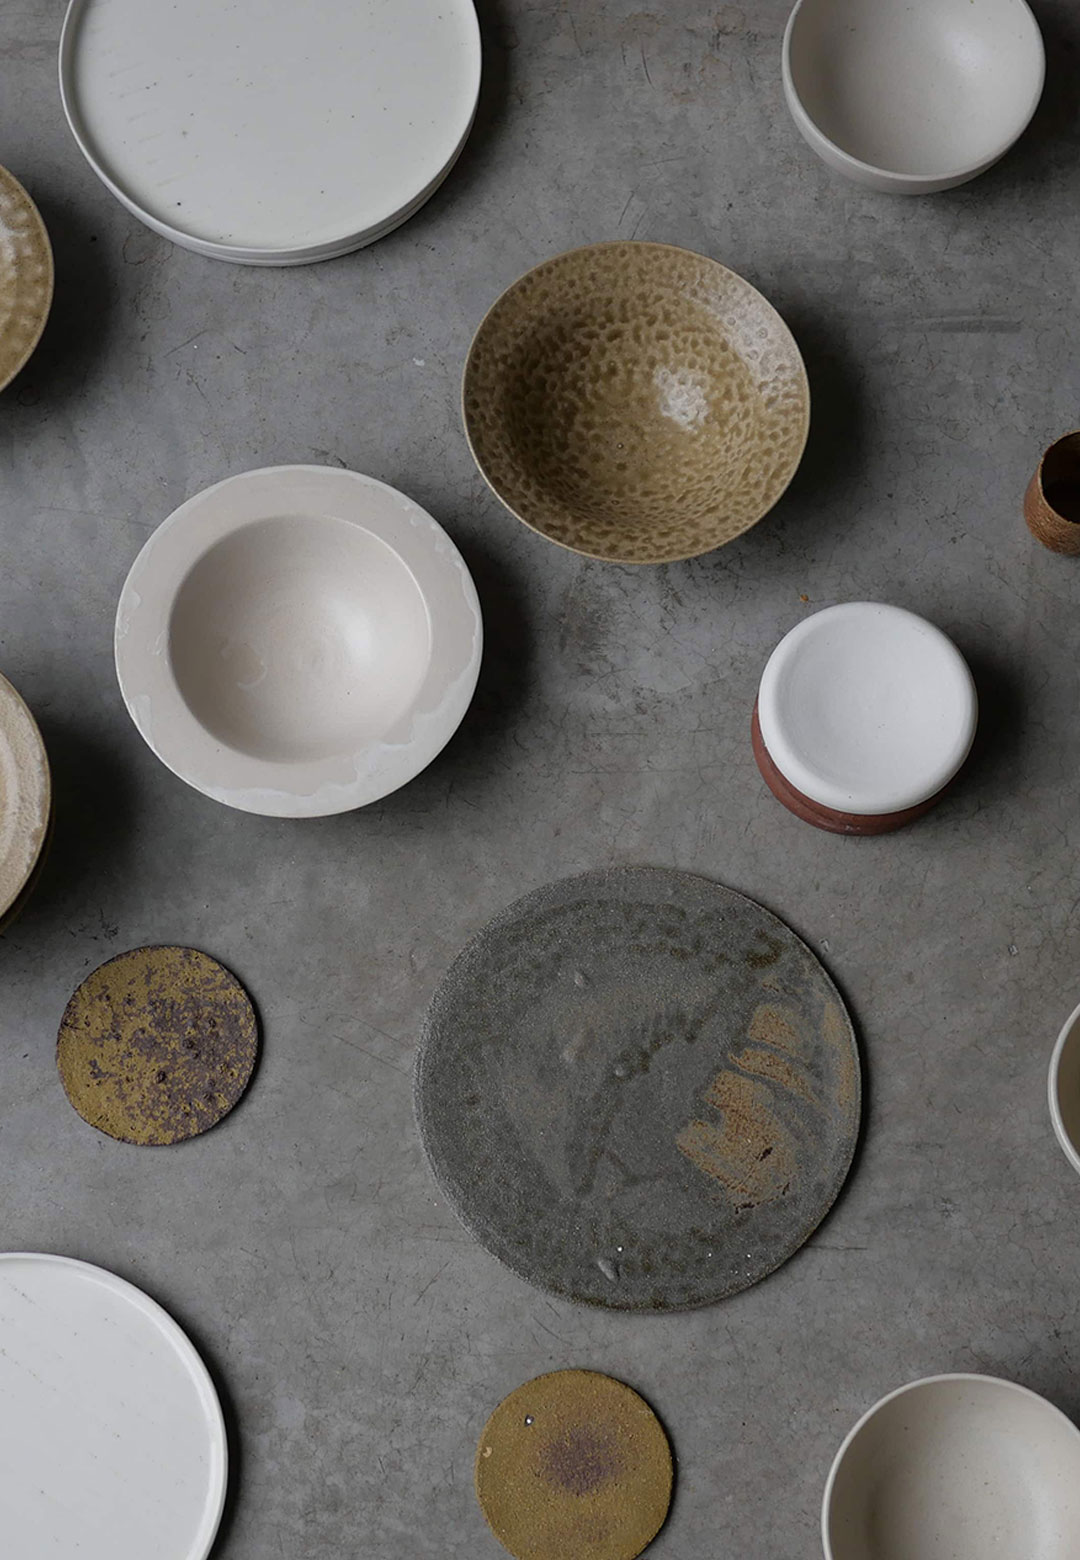 Carly Breame cooks 'Off the Menu' with tableware in latest collection